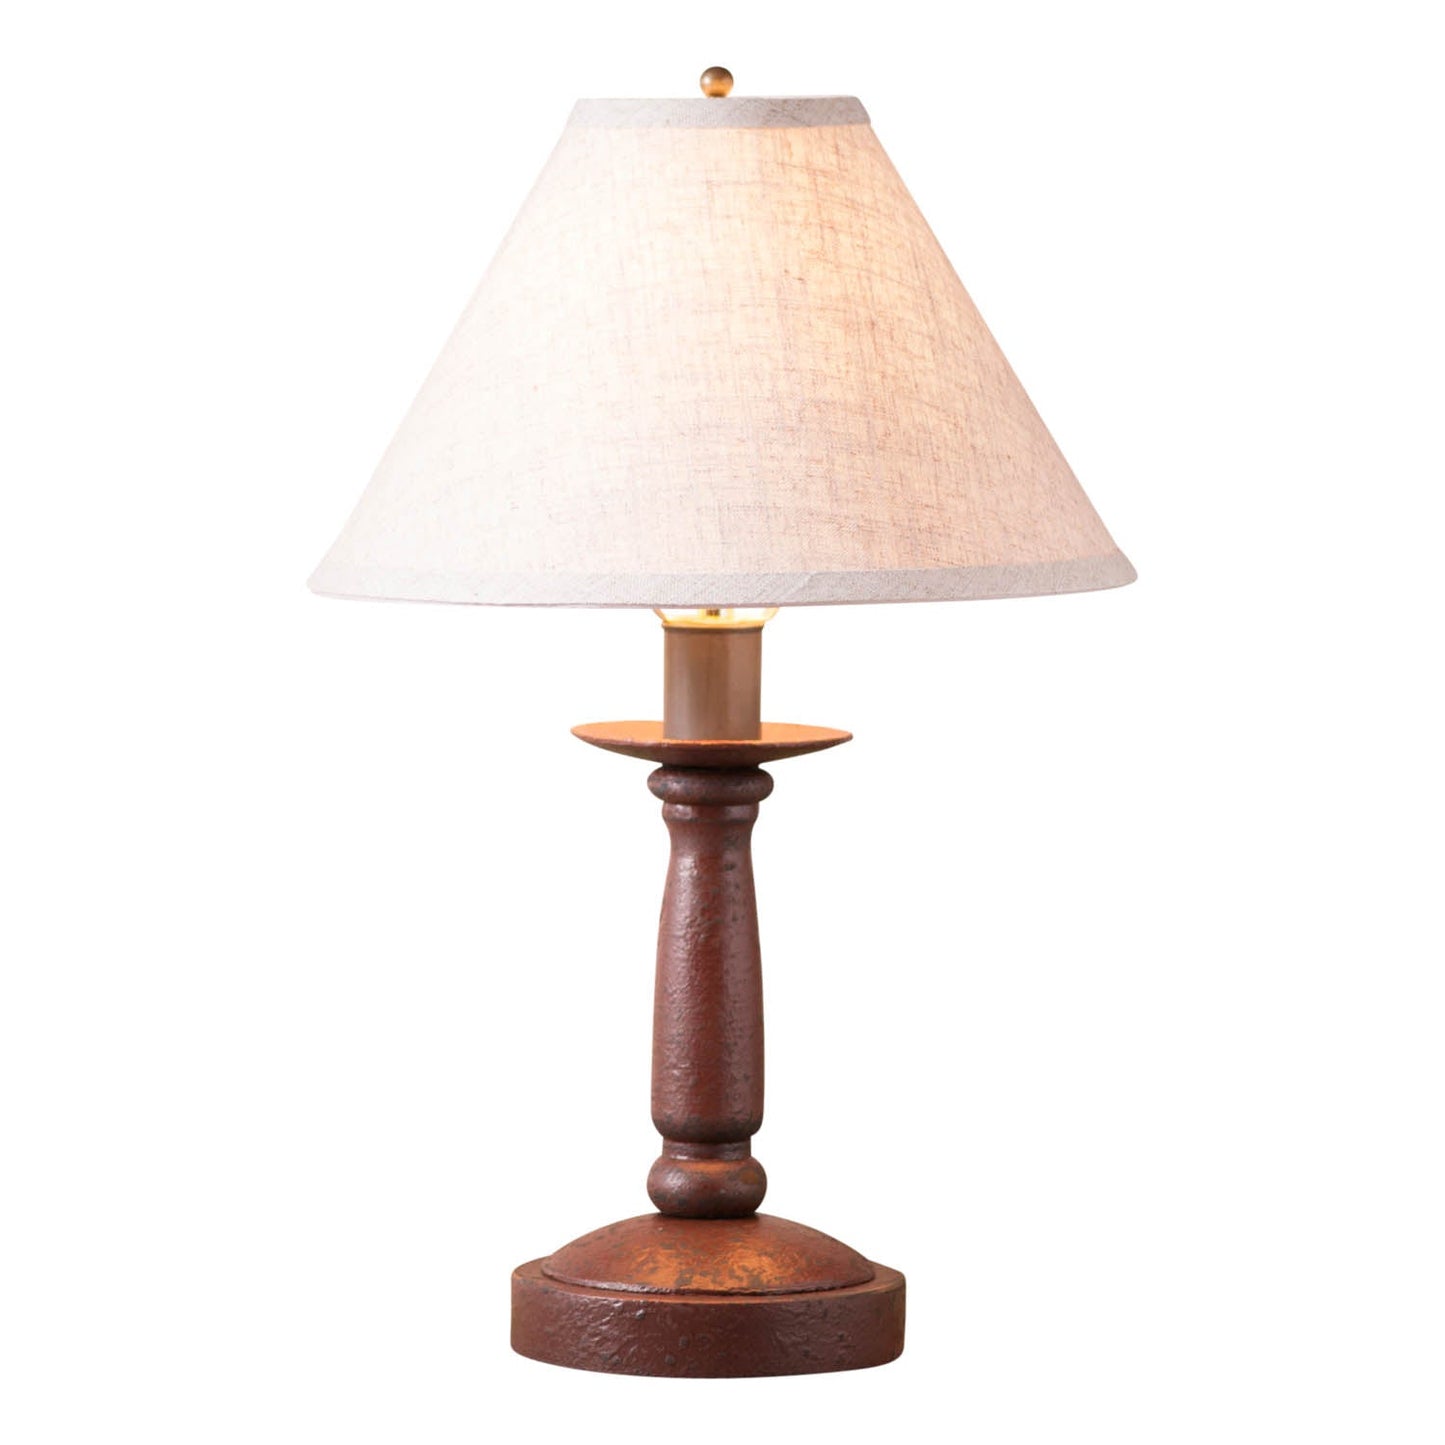 Butcher Lamp in Americana Black with Ivory Linen Shade